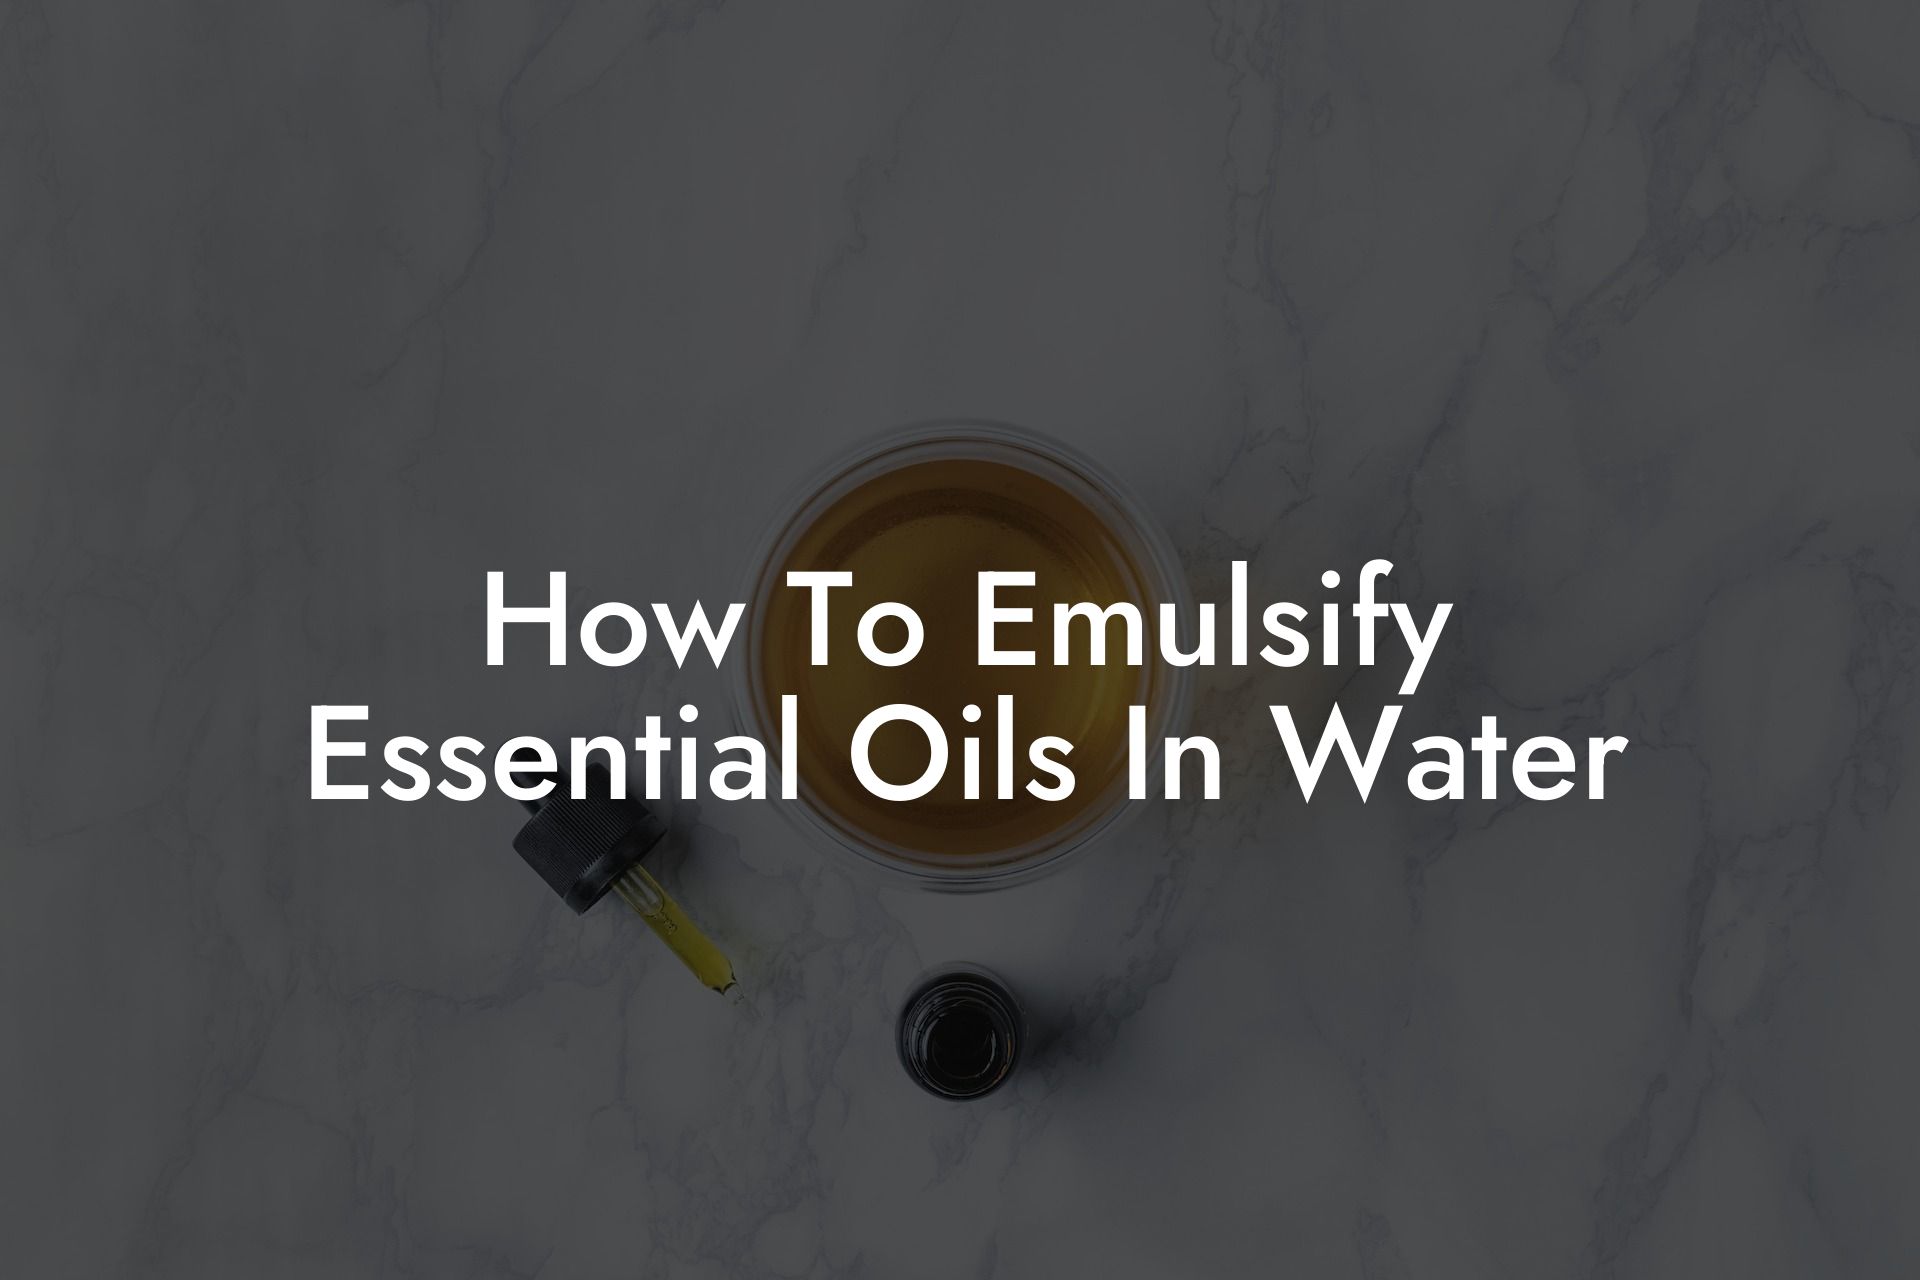 How To Emulsify Essential Oils In Water